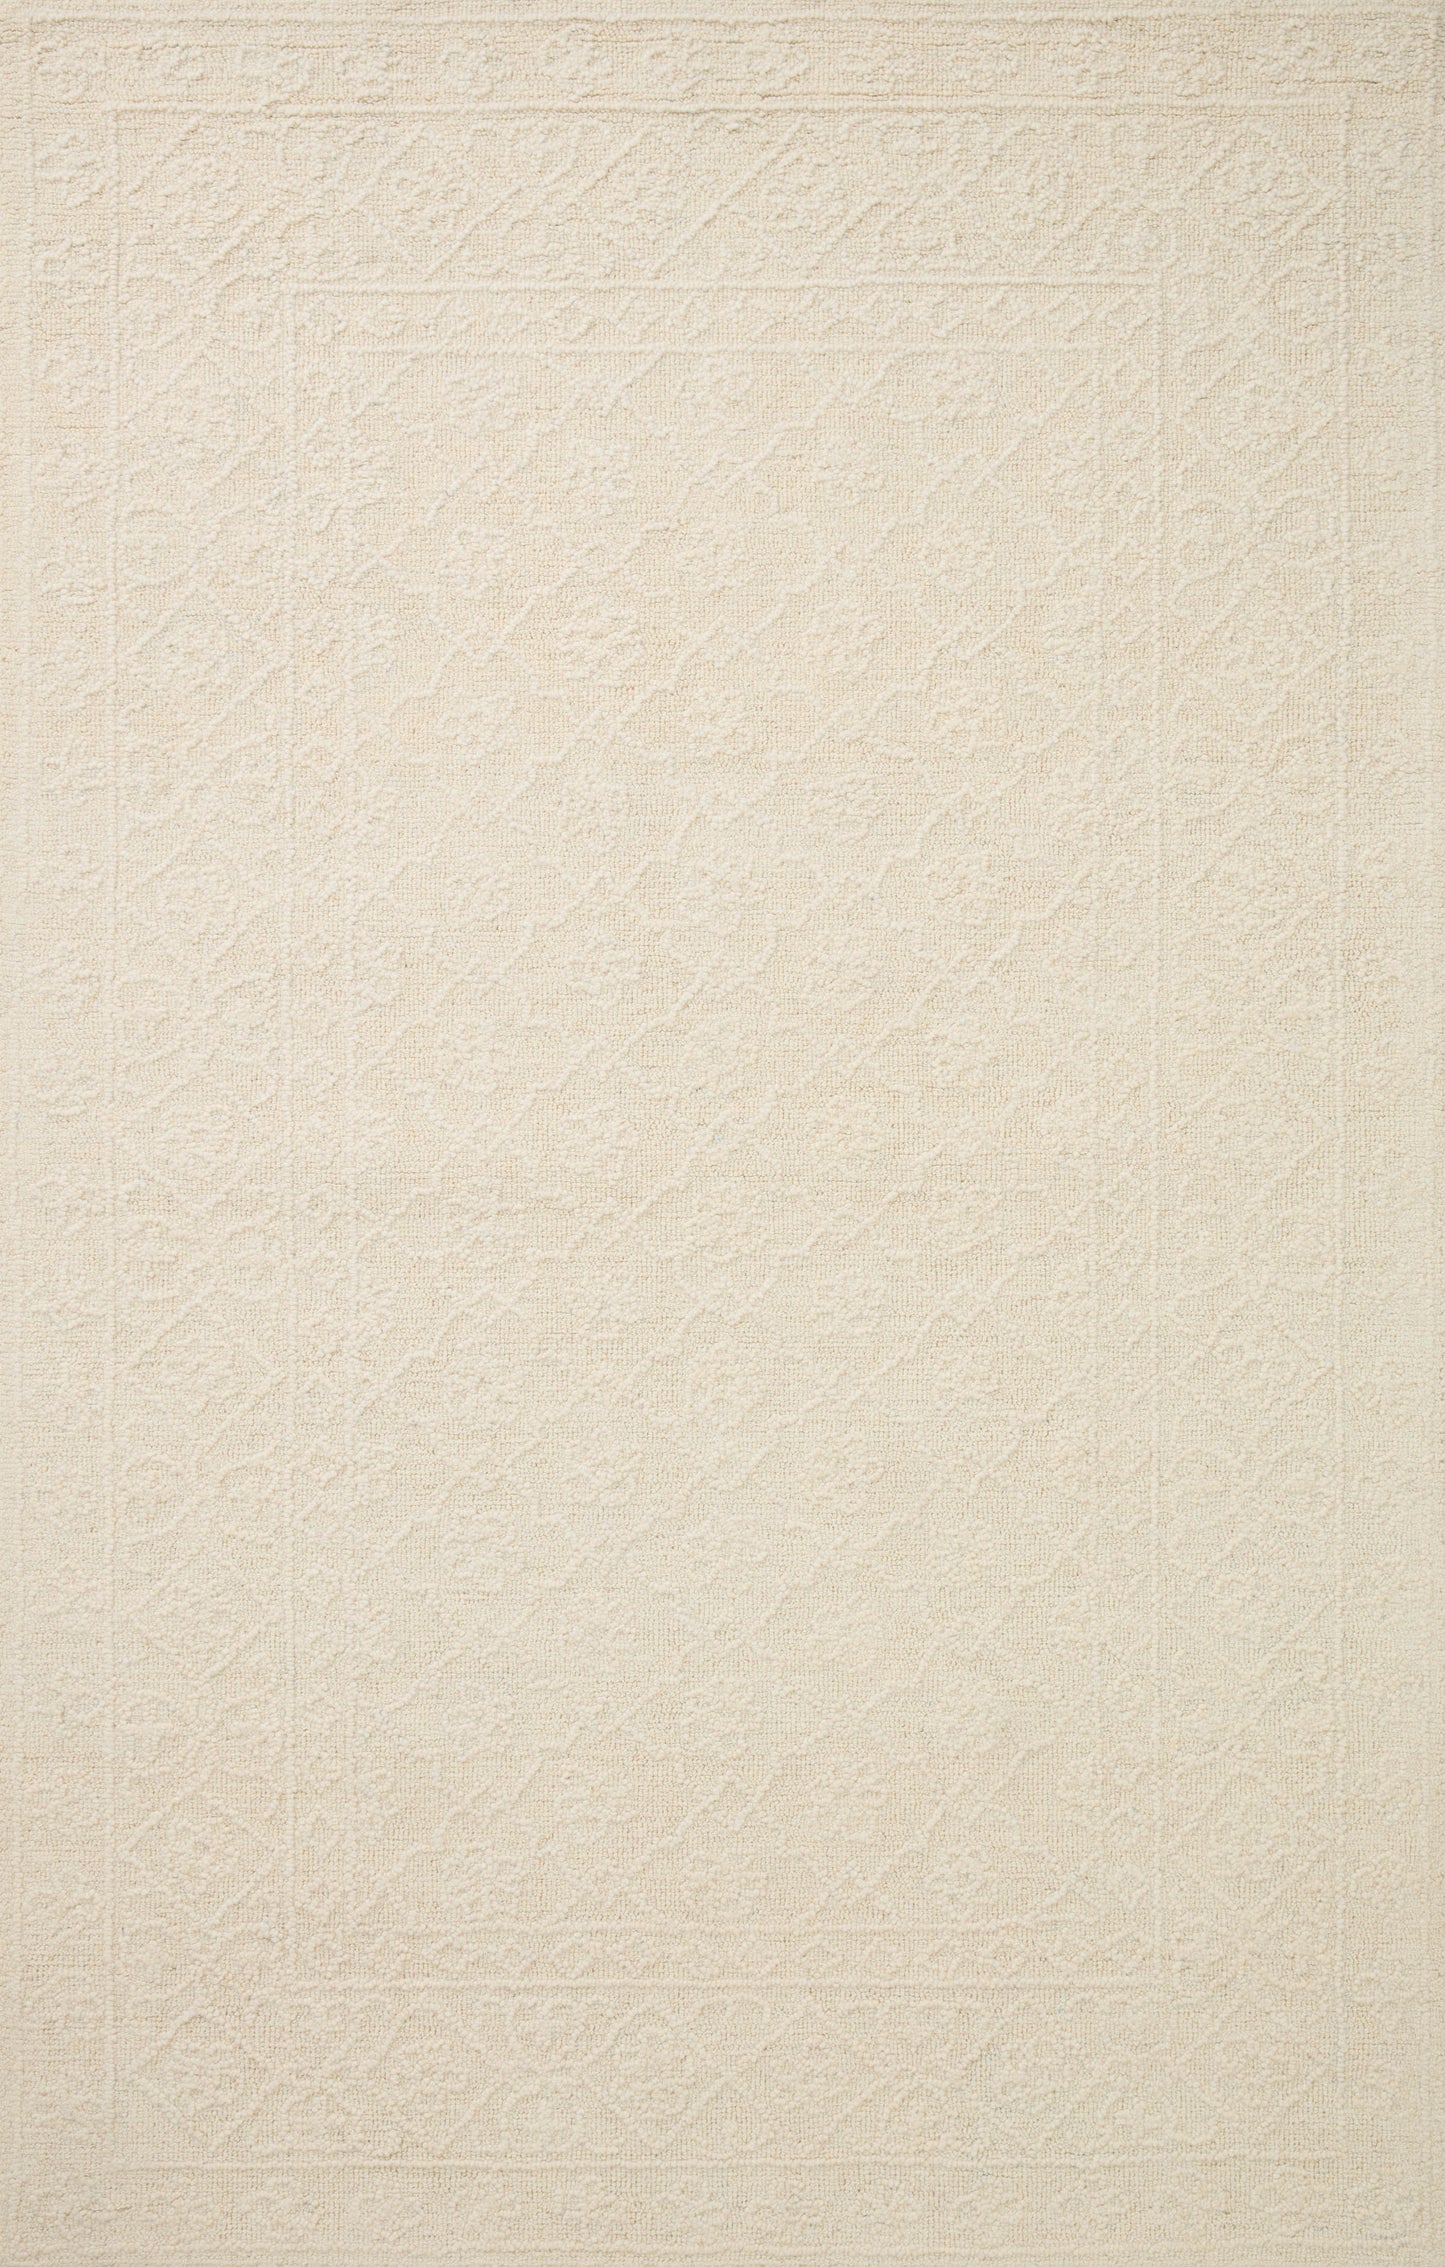 A picture of Loloi's Cecelia rug, in style CEC-01, color Ivory / Ivory